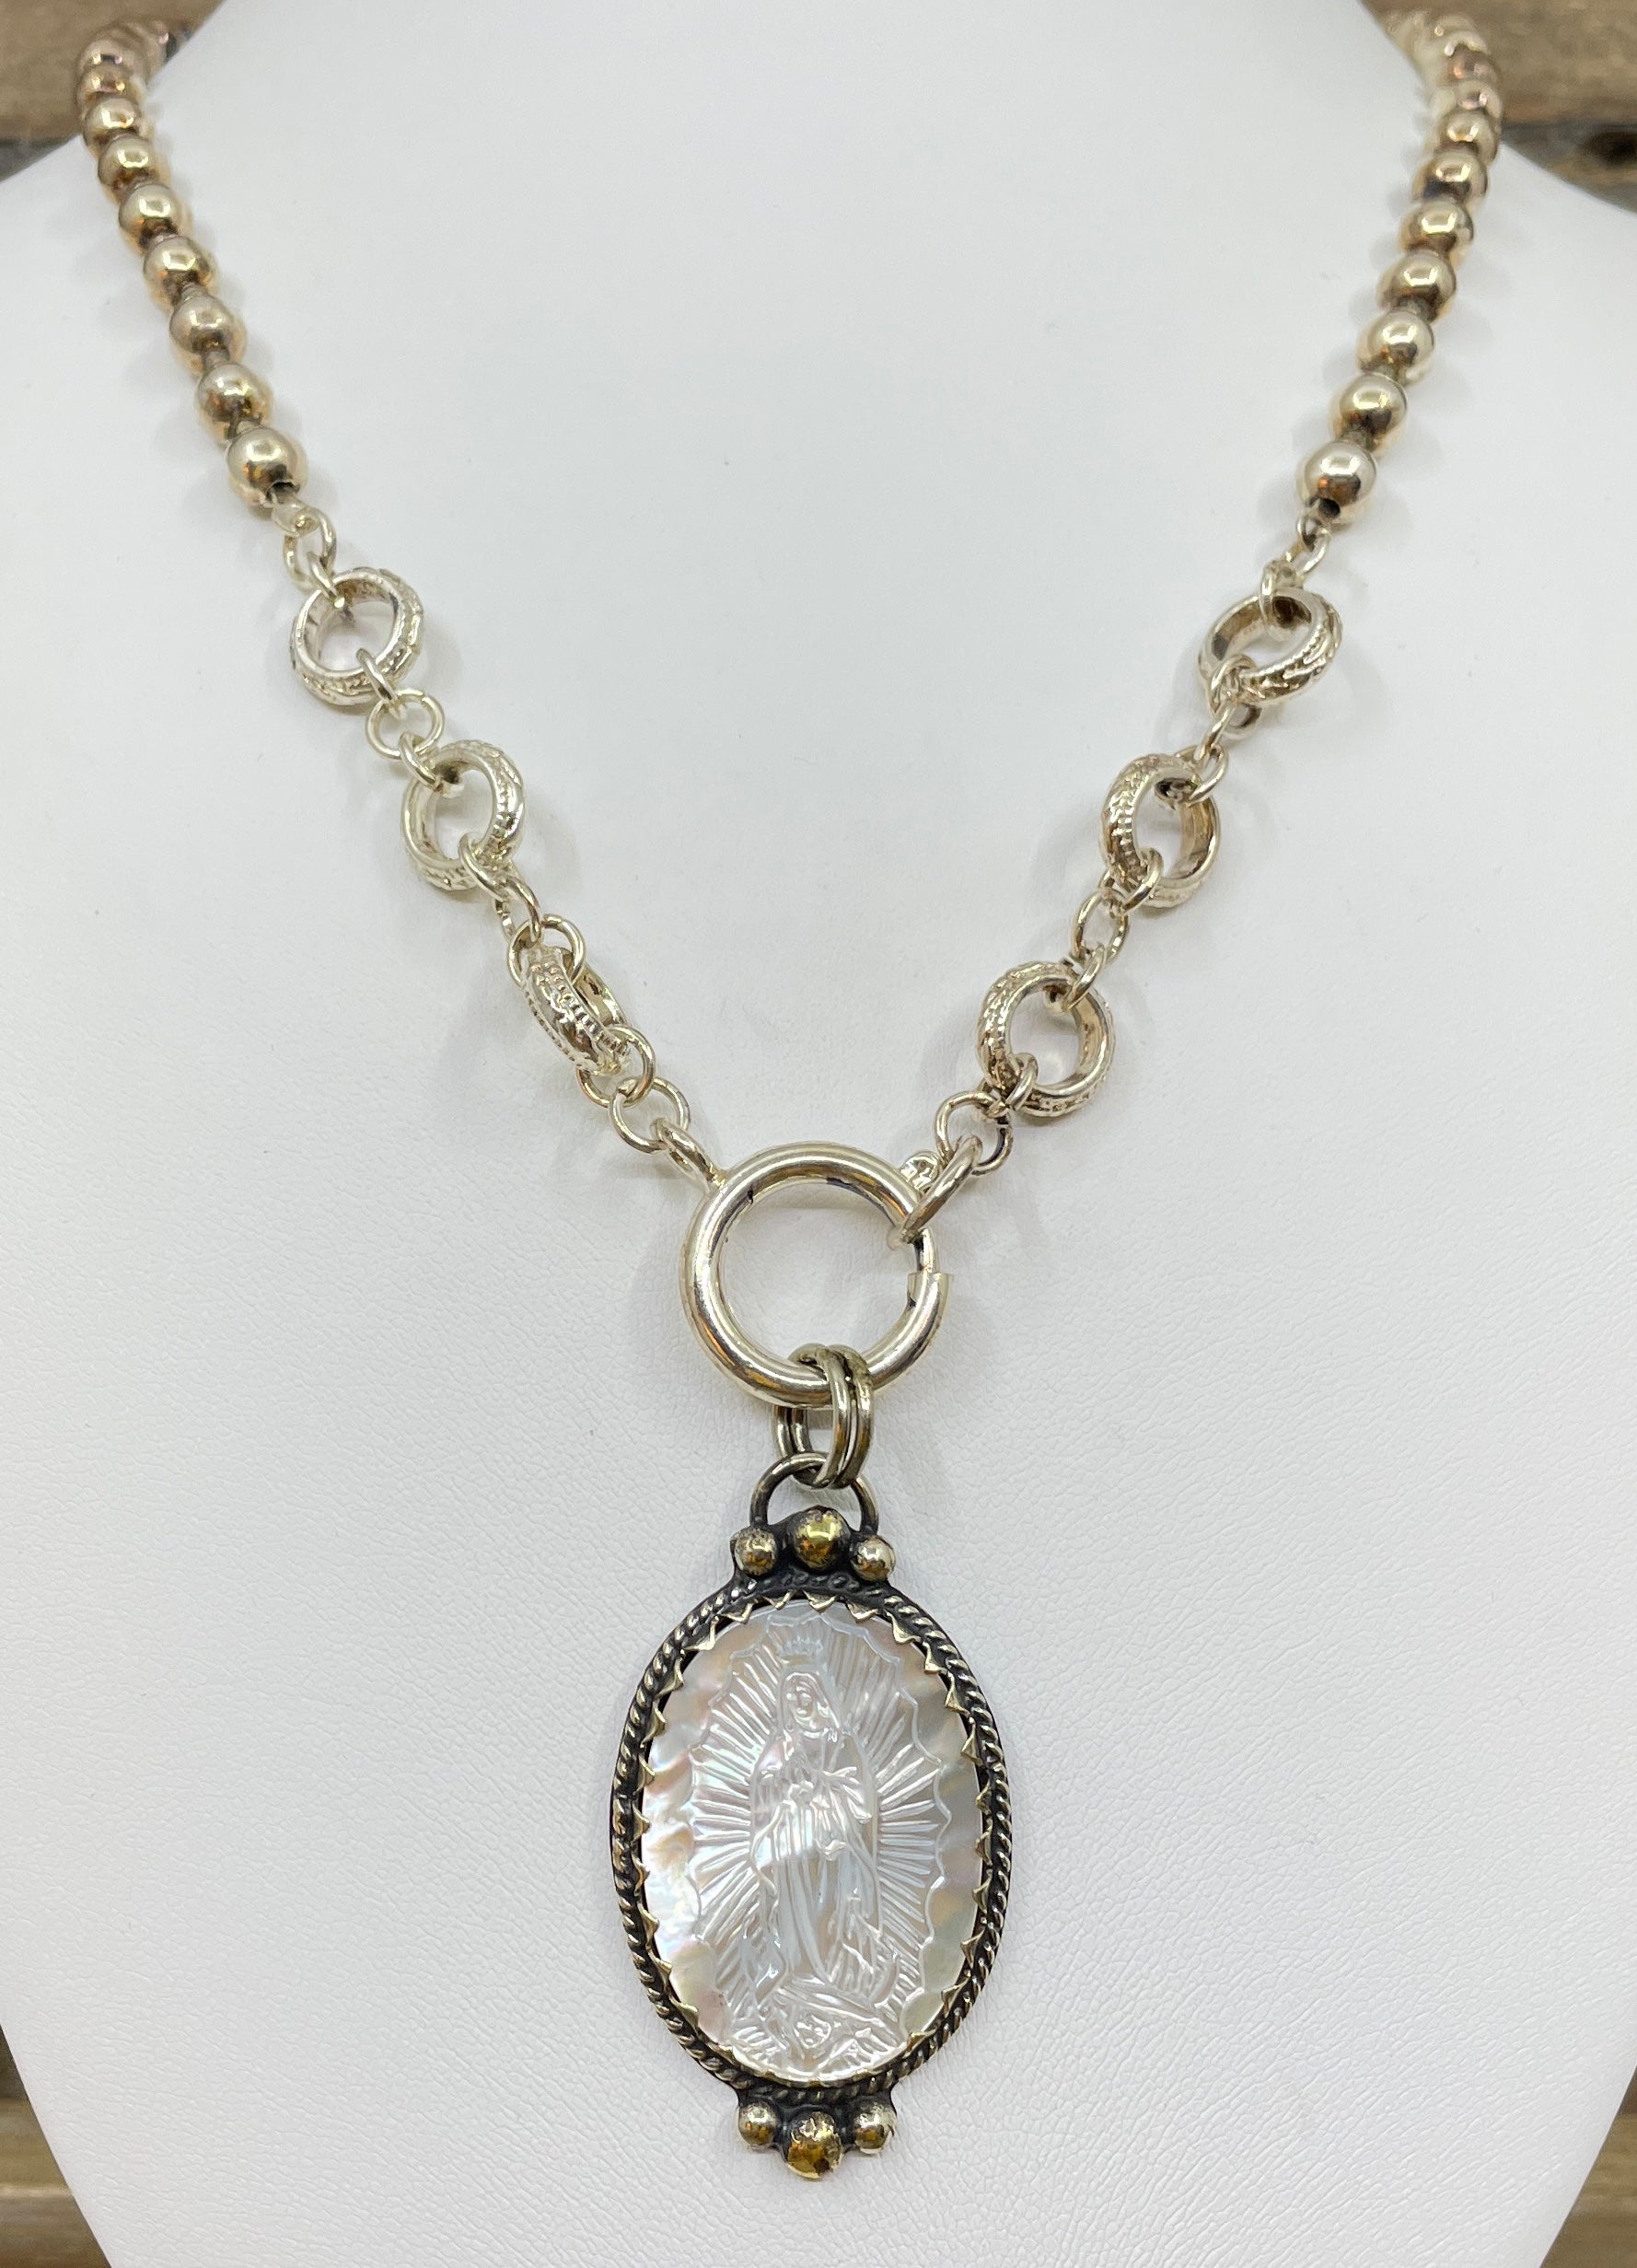 Vintage Mother of Pearl Religious Pendant Necklace